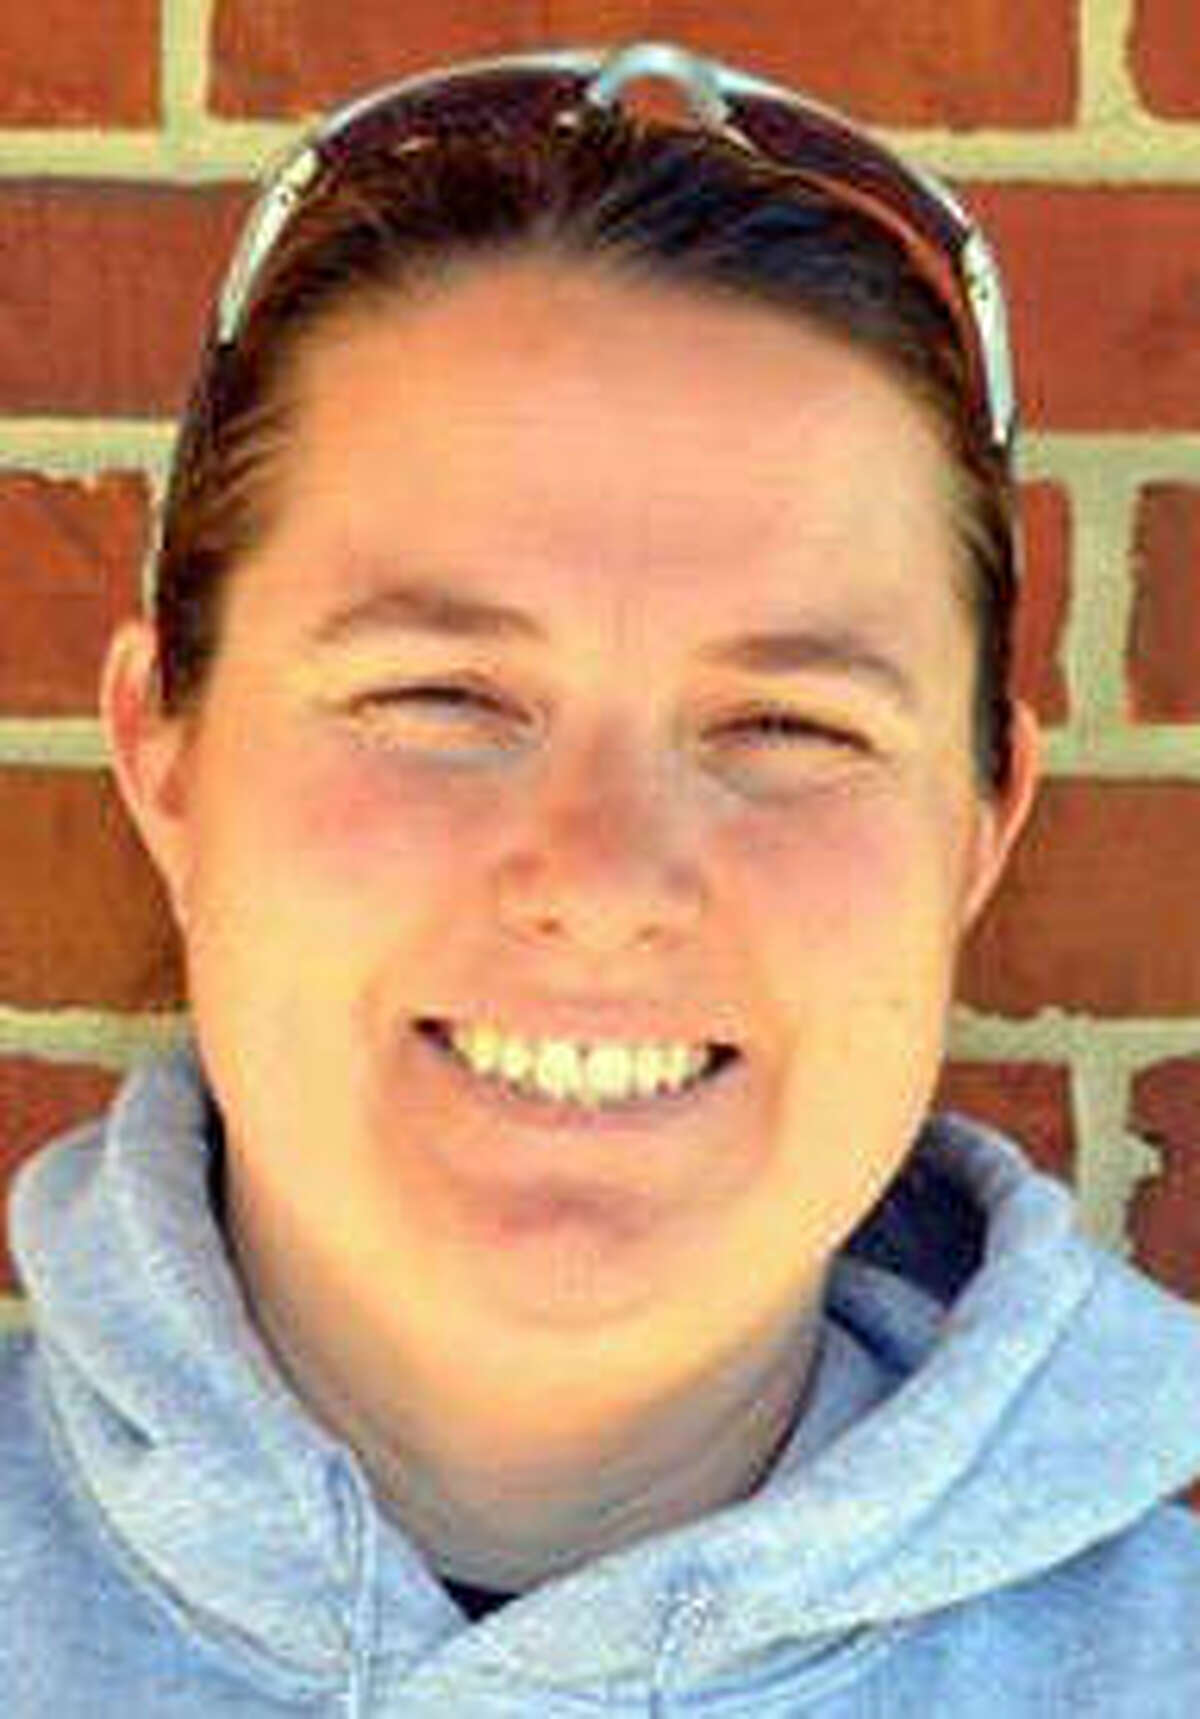 Edwardsville's Camilla Eberlin is the 2022 Telegraph Girls Track Coach of the Year.